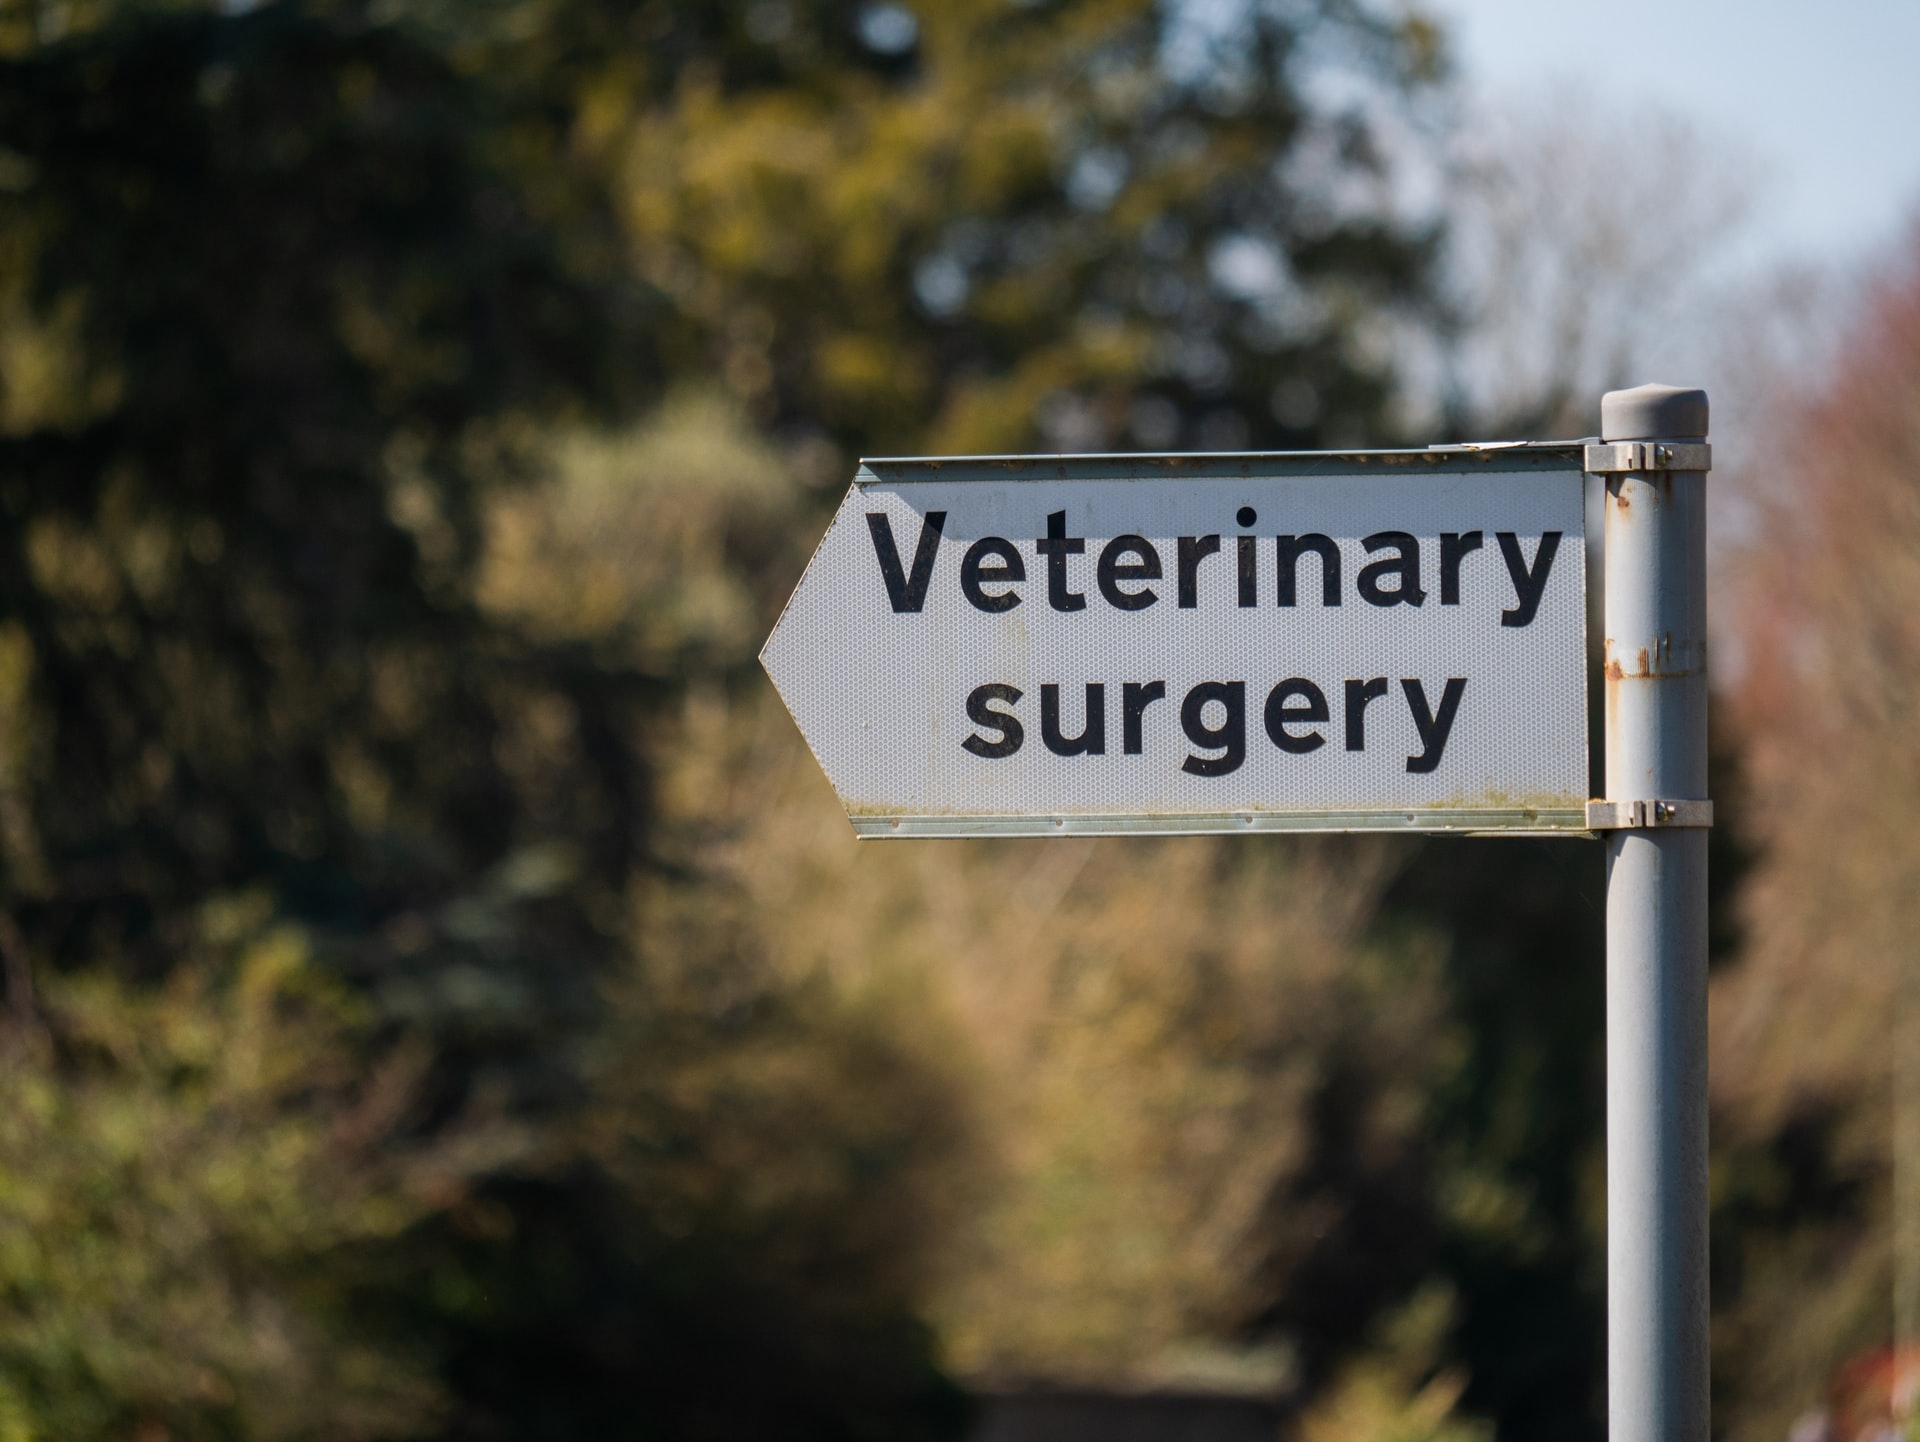 What You Can Expect from Our Veterinary Hospital